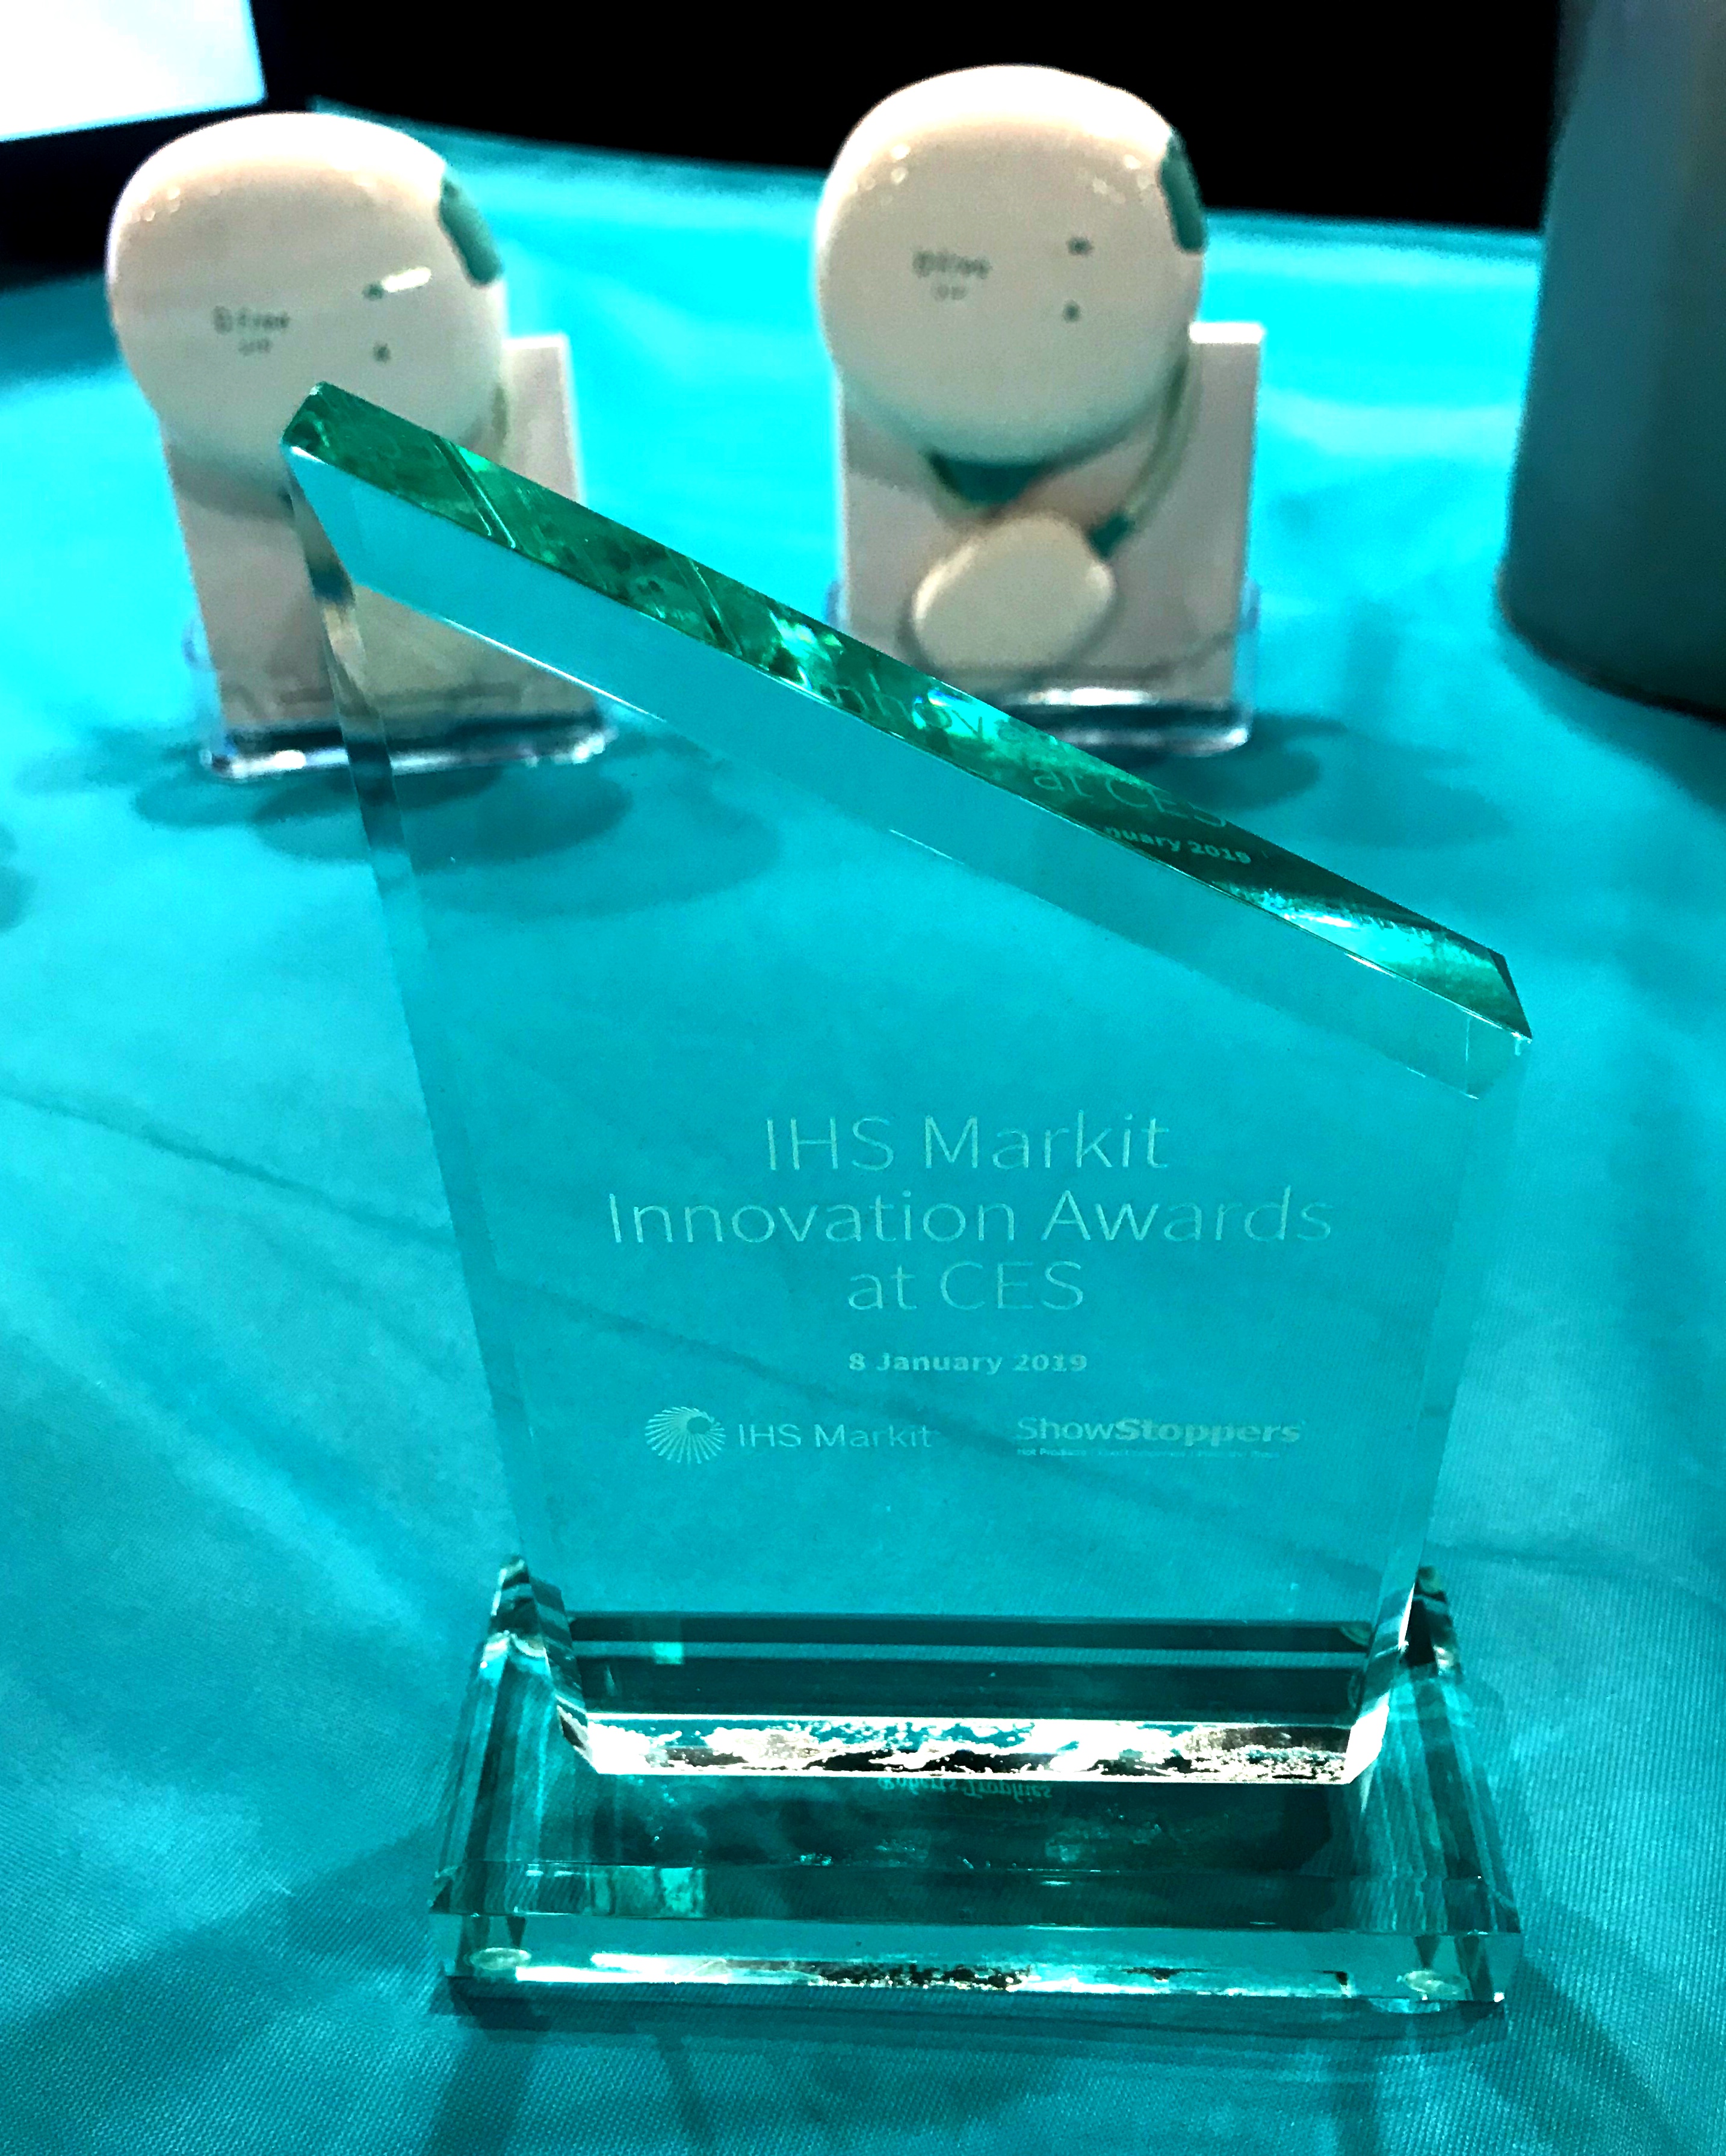 Triple W won the IHS Markit Innovation Award in the “Fitness, Wearables and Health Devices” category for DFree®, the first health wearable device for urinary incontinence.